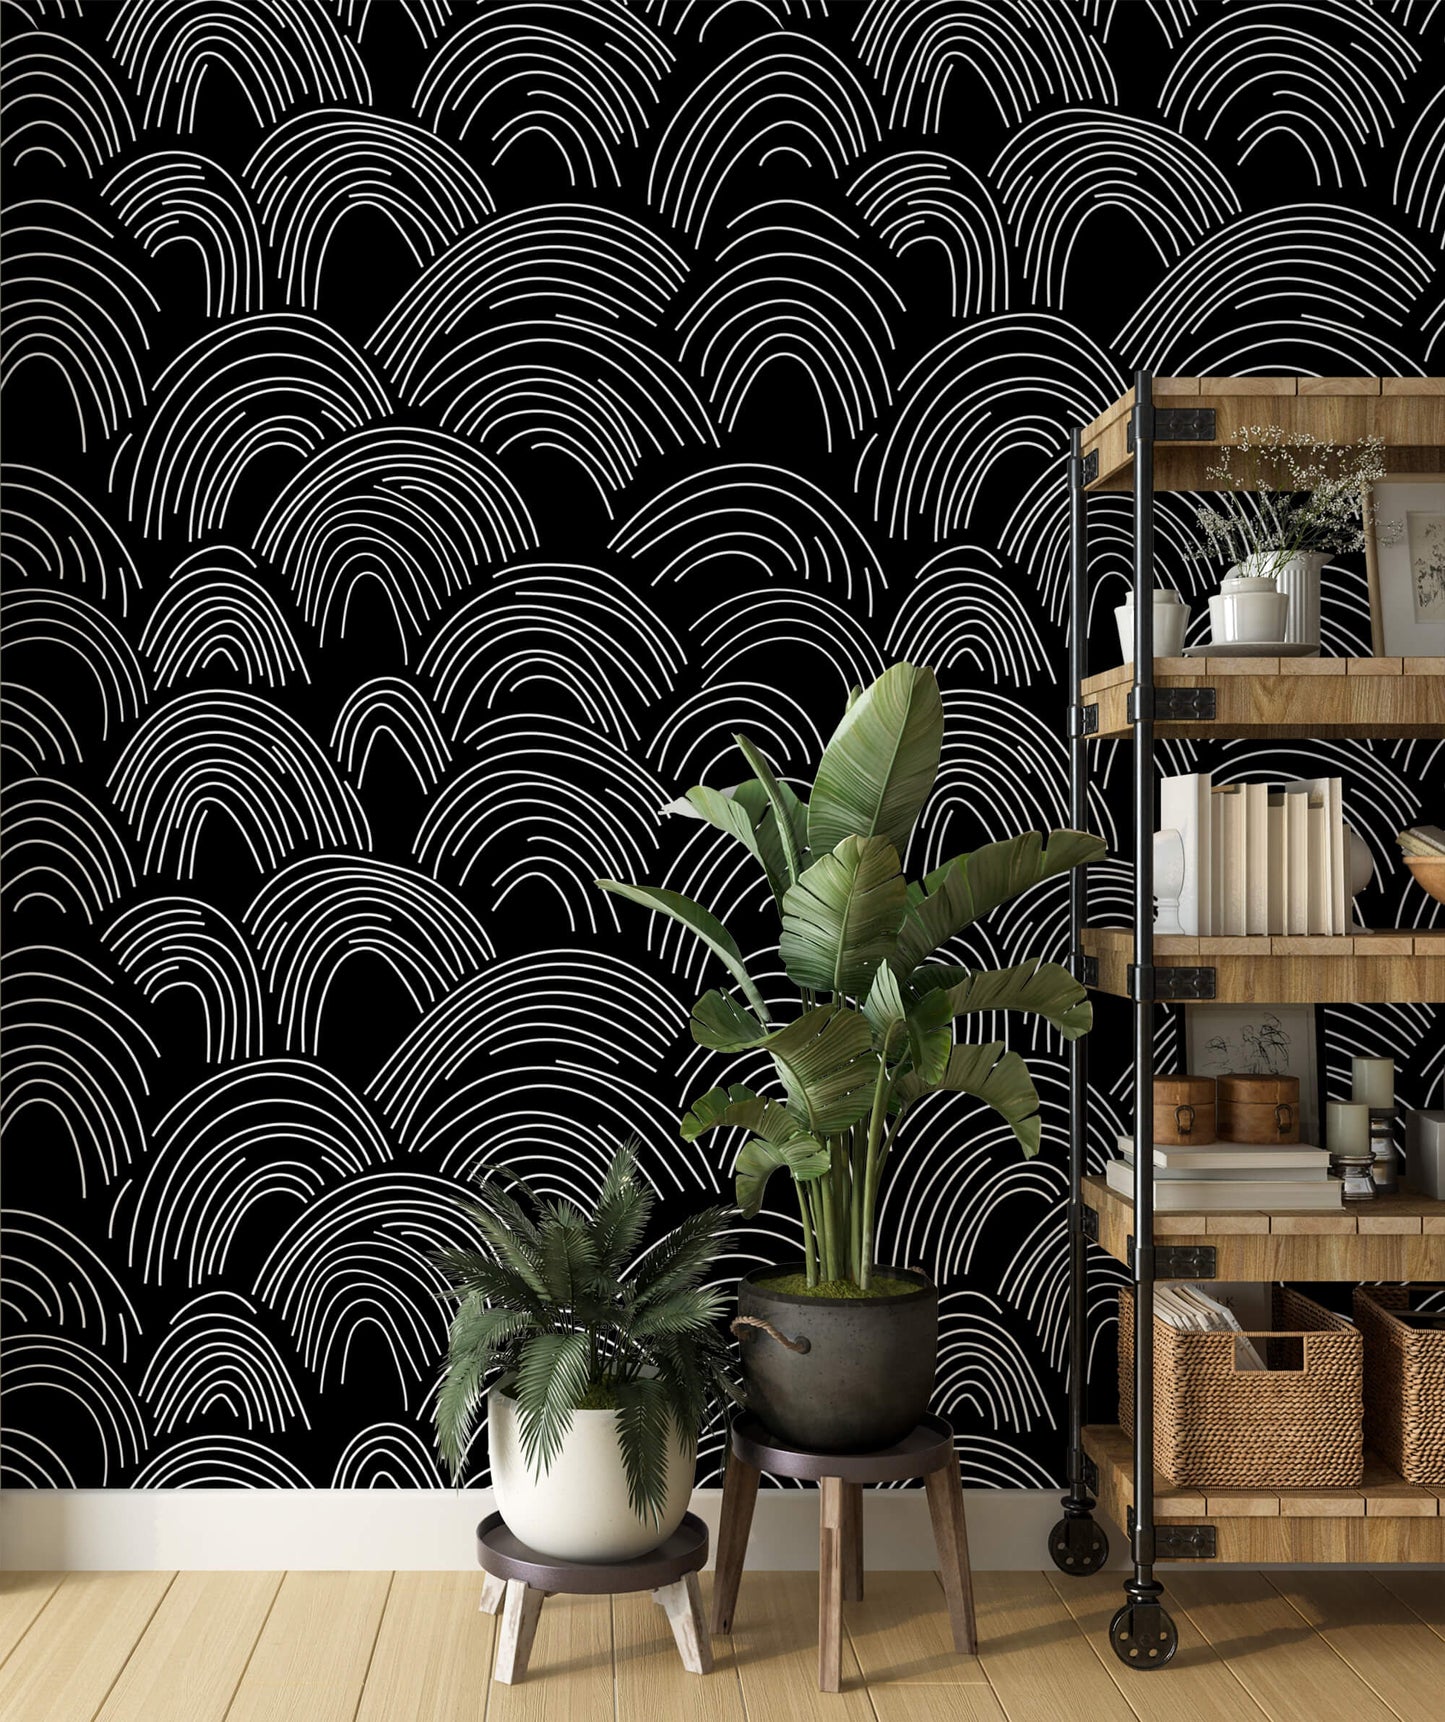 Minimalist Midnight Lines Wallpaper: Embrace sleek sophistication with this minimalist design, featuring clean lines against a midnight backdrop, perfect for adding a touch of modern elegance to any space.